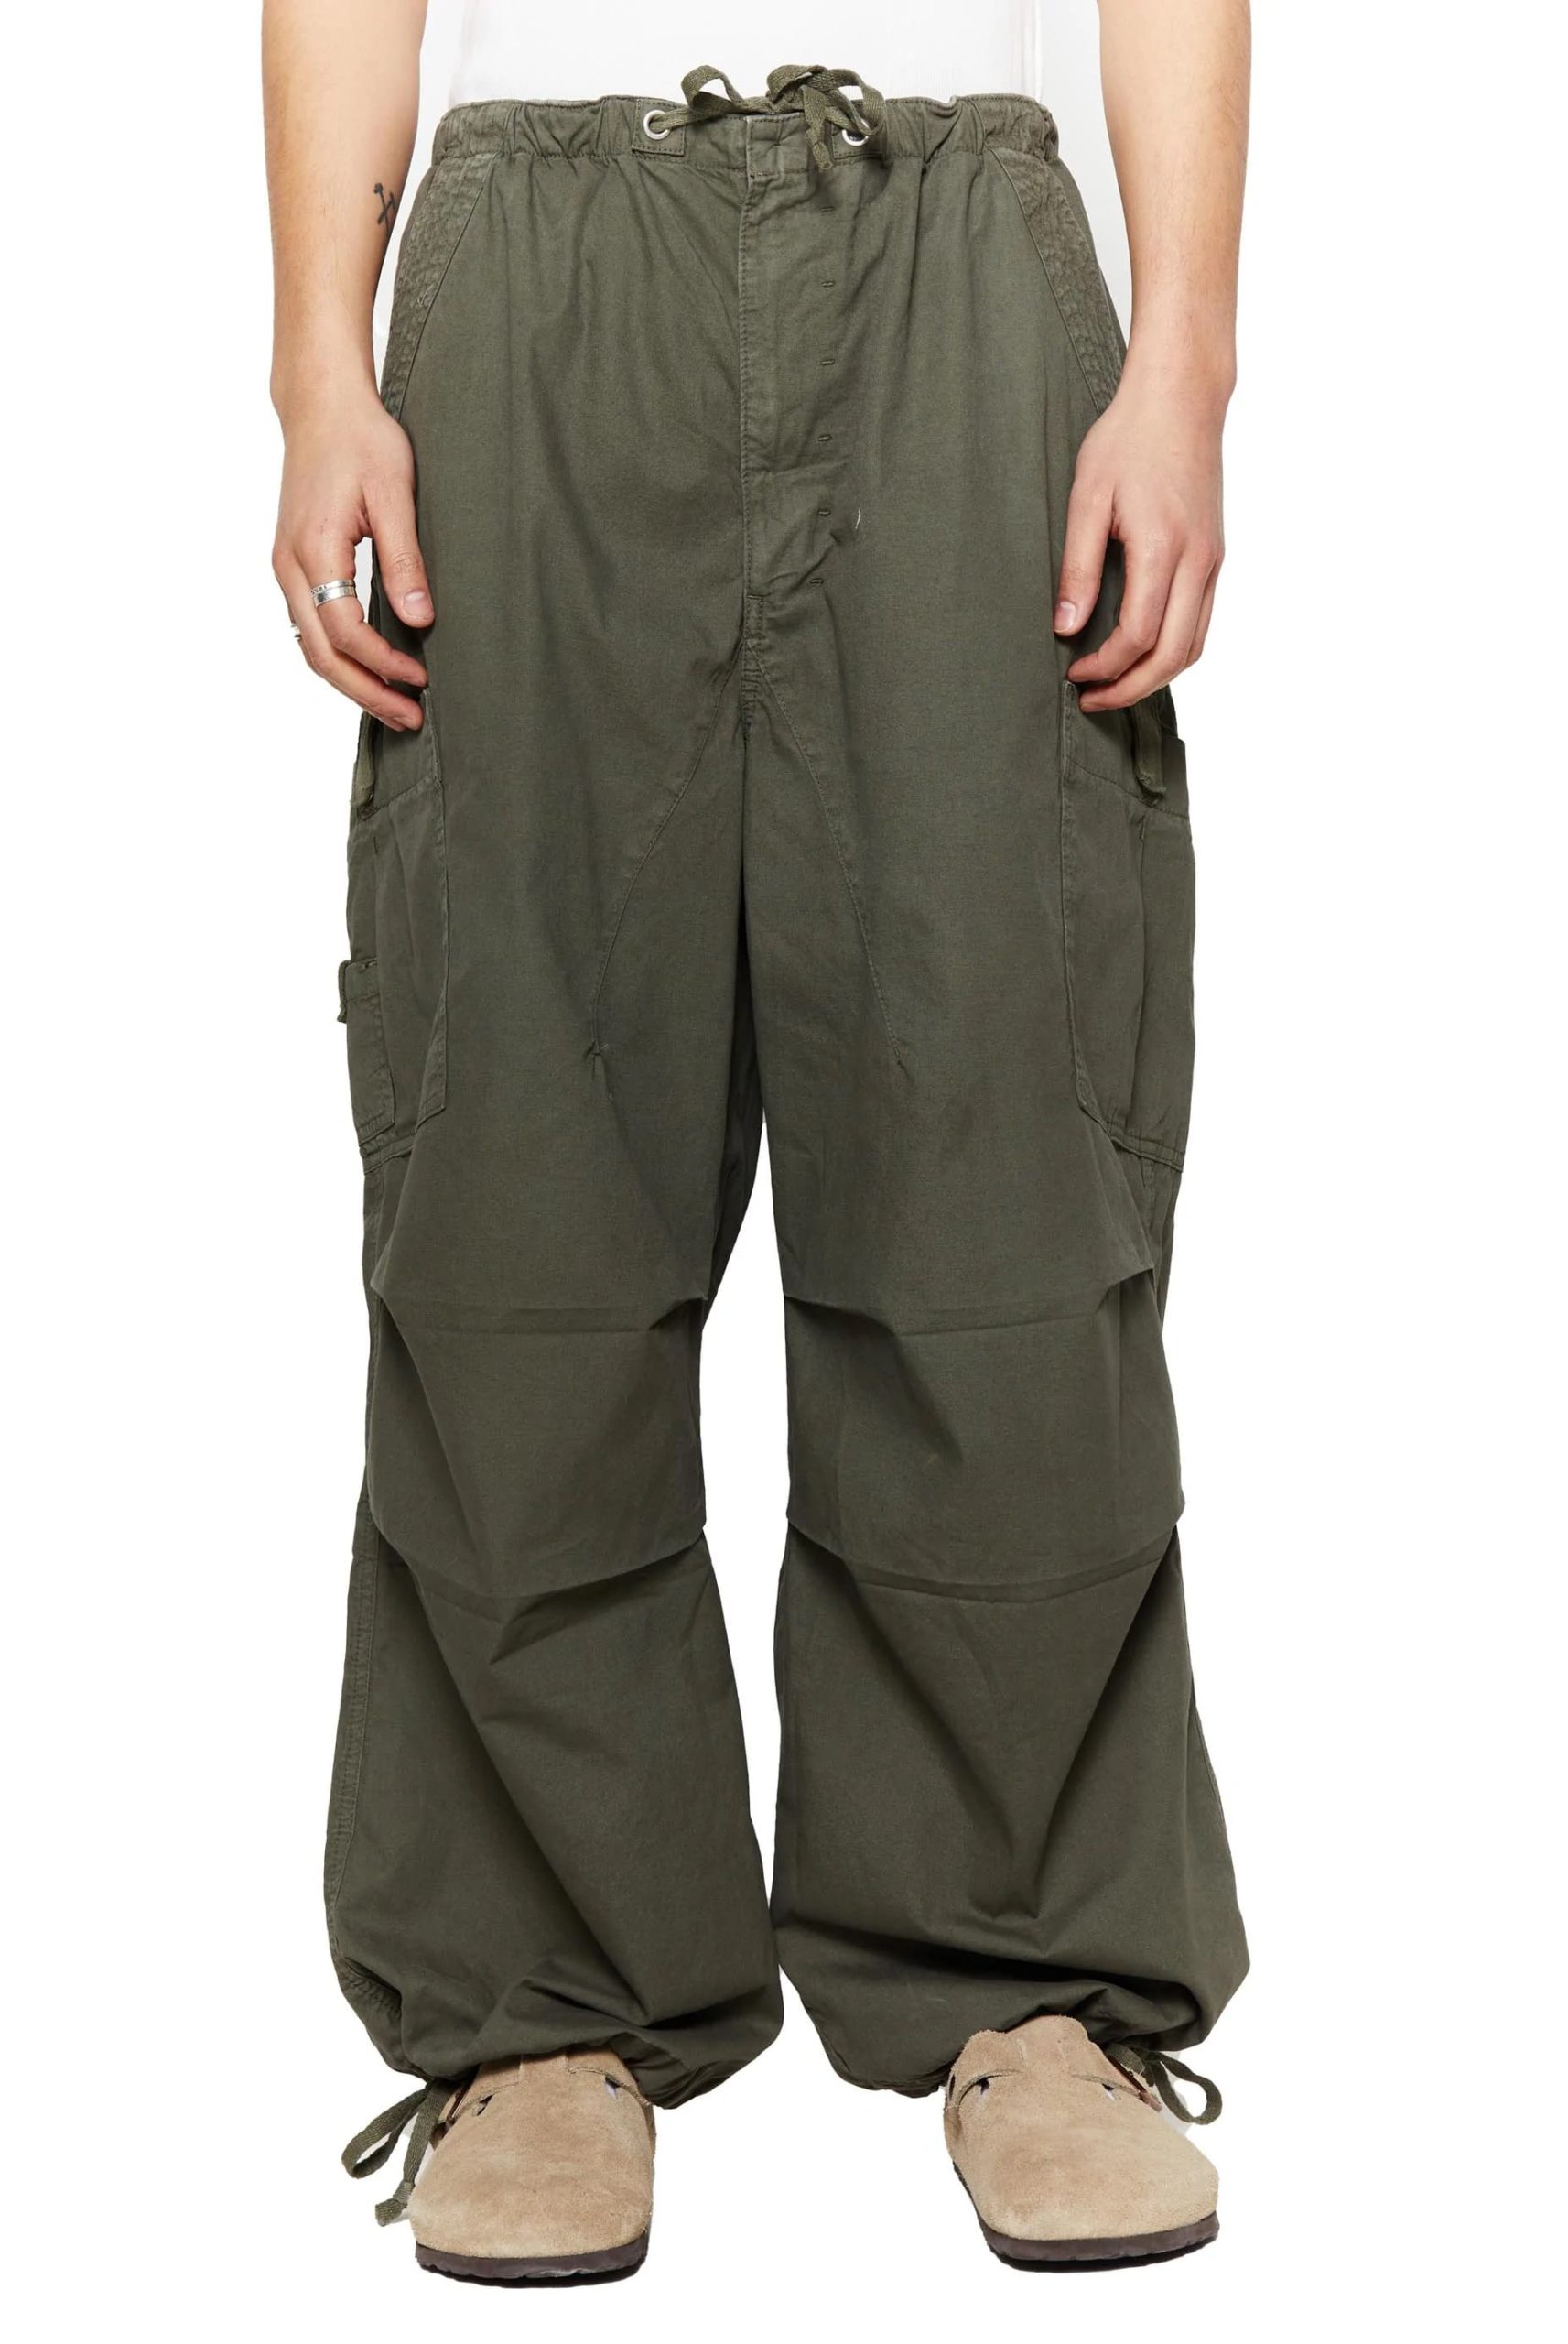 UO Jaded London Baggy Cargo Pant